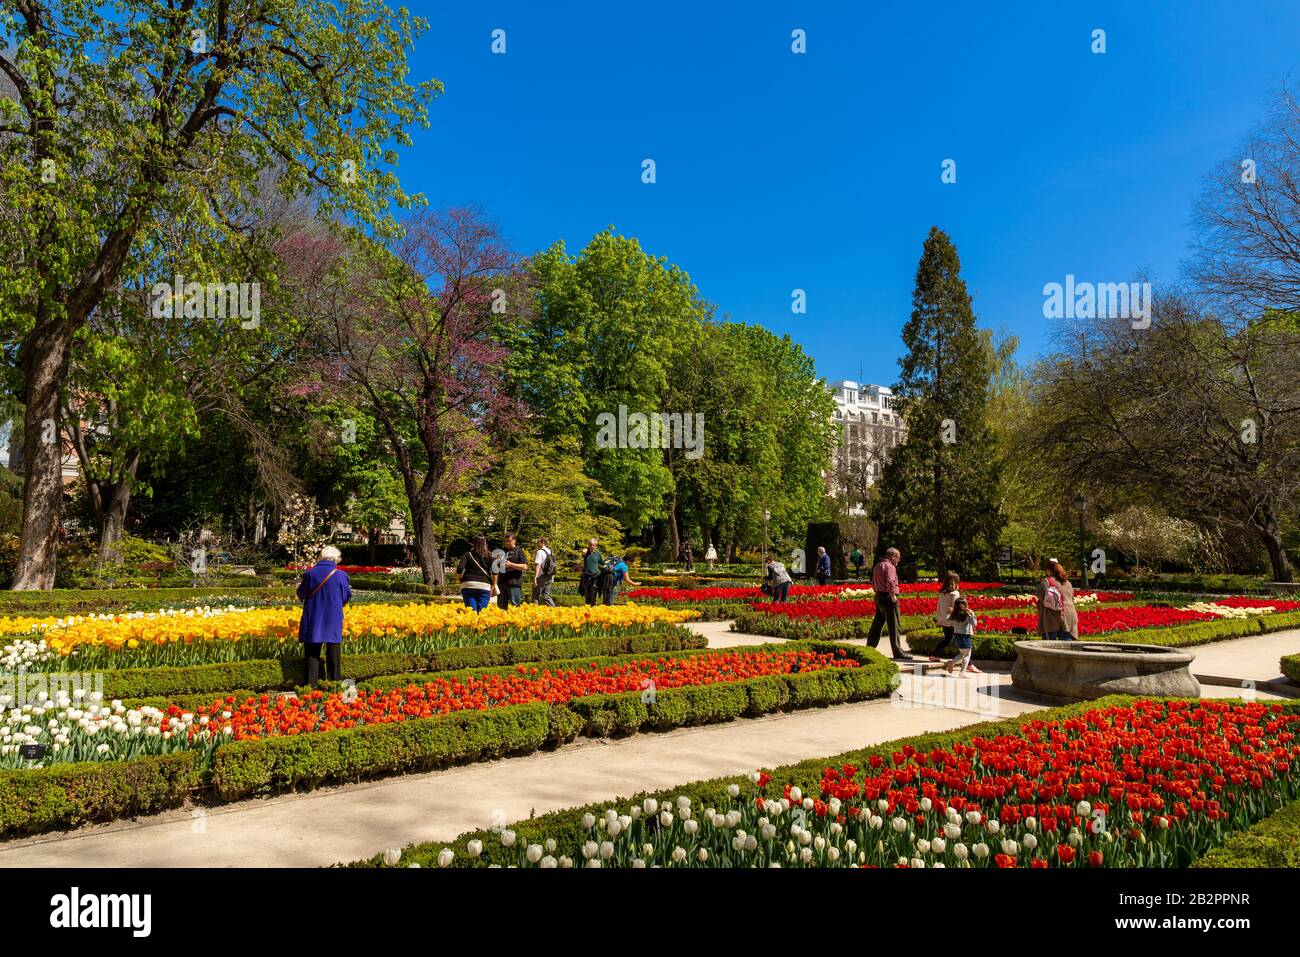 Tulips in the Royal Botanical Gardens, Madrid, Spain Stock Photo